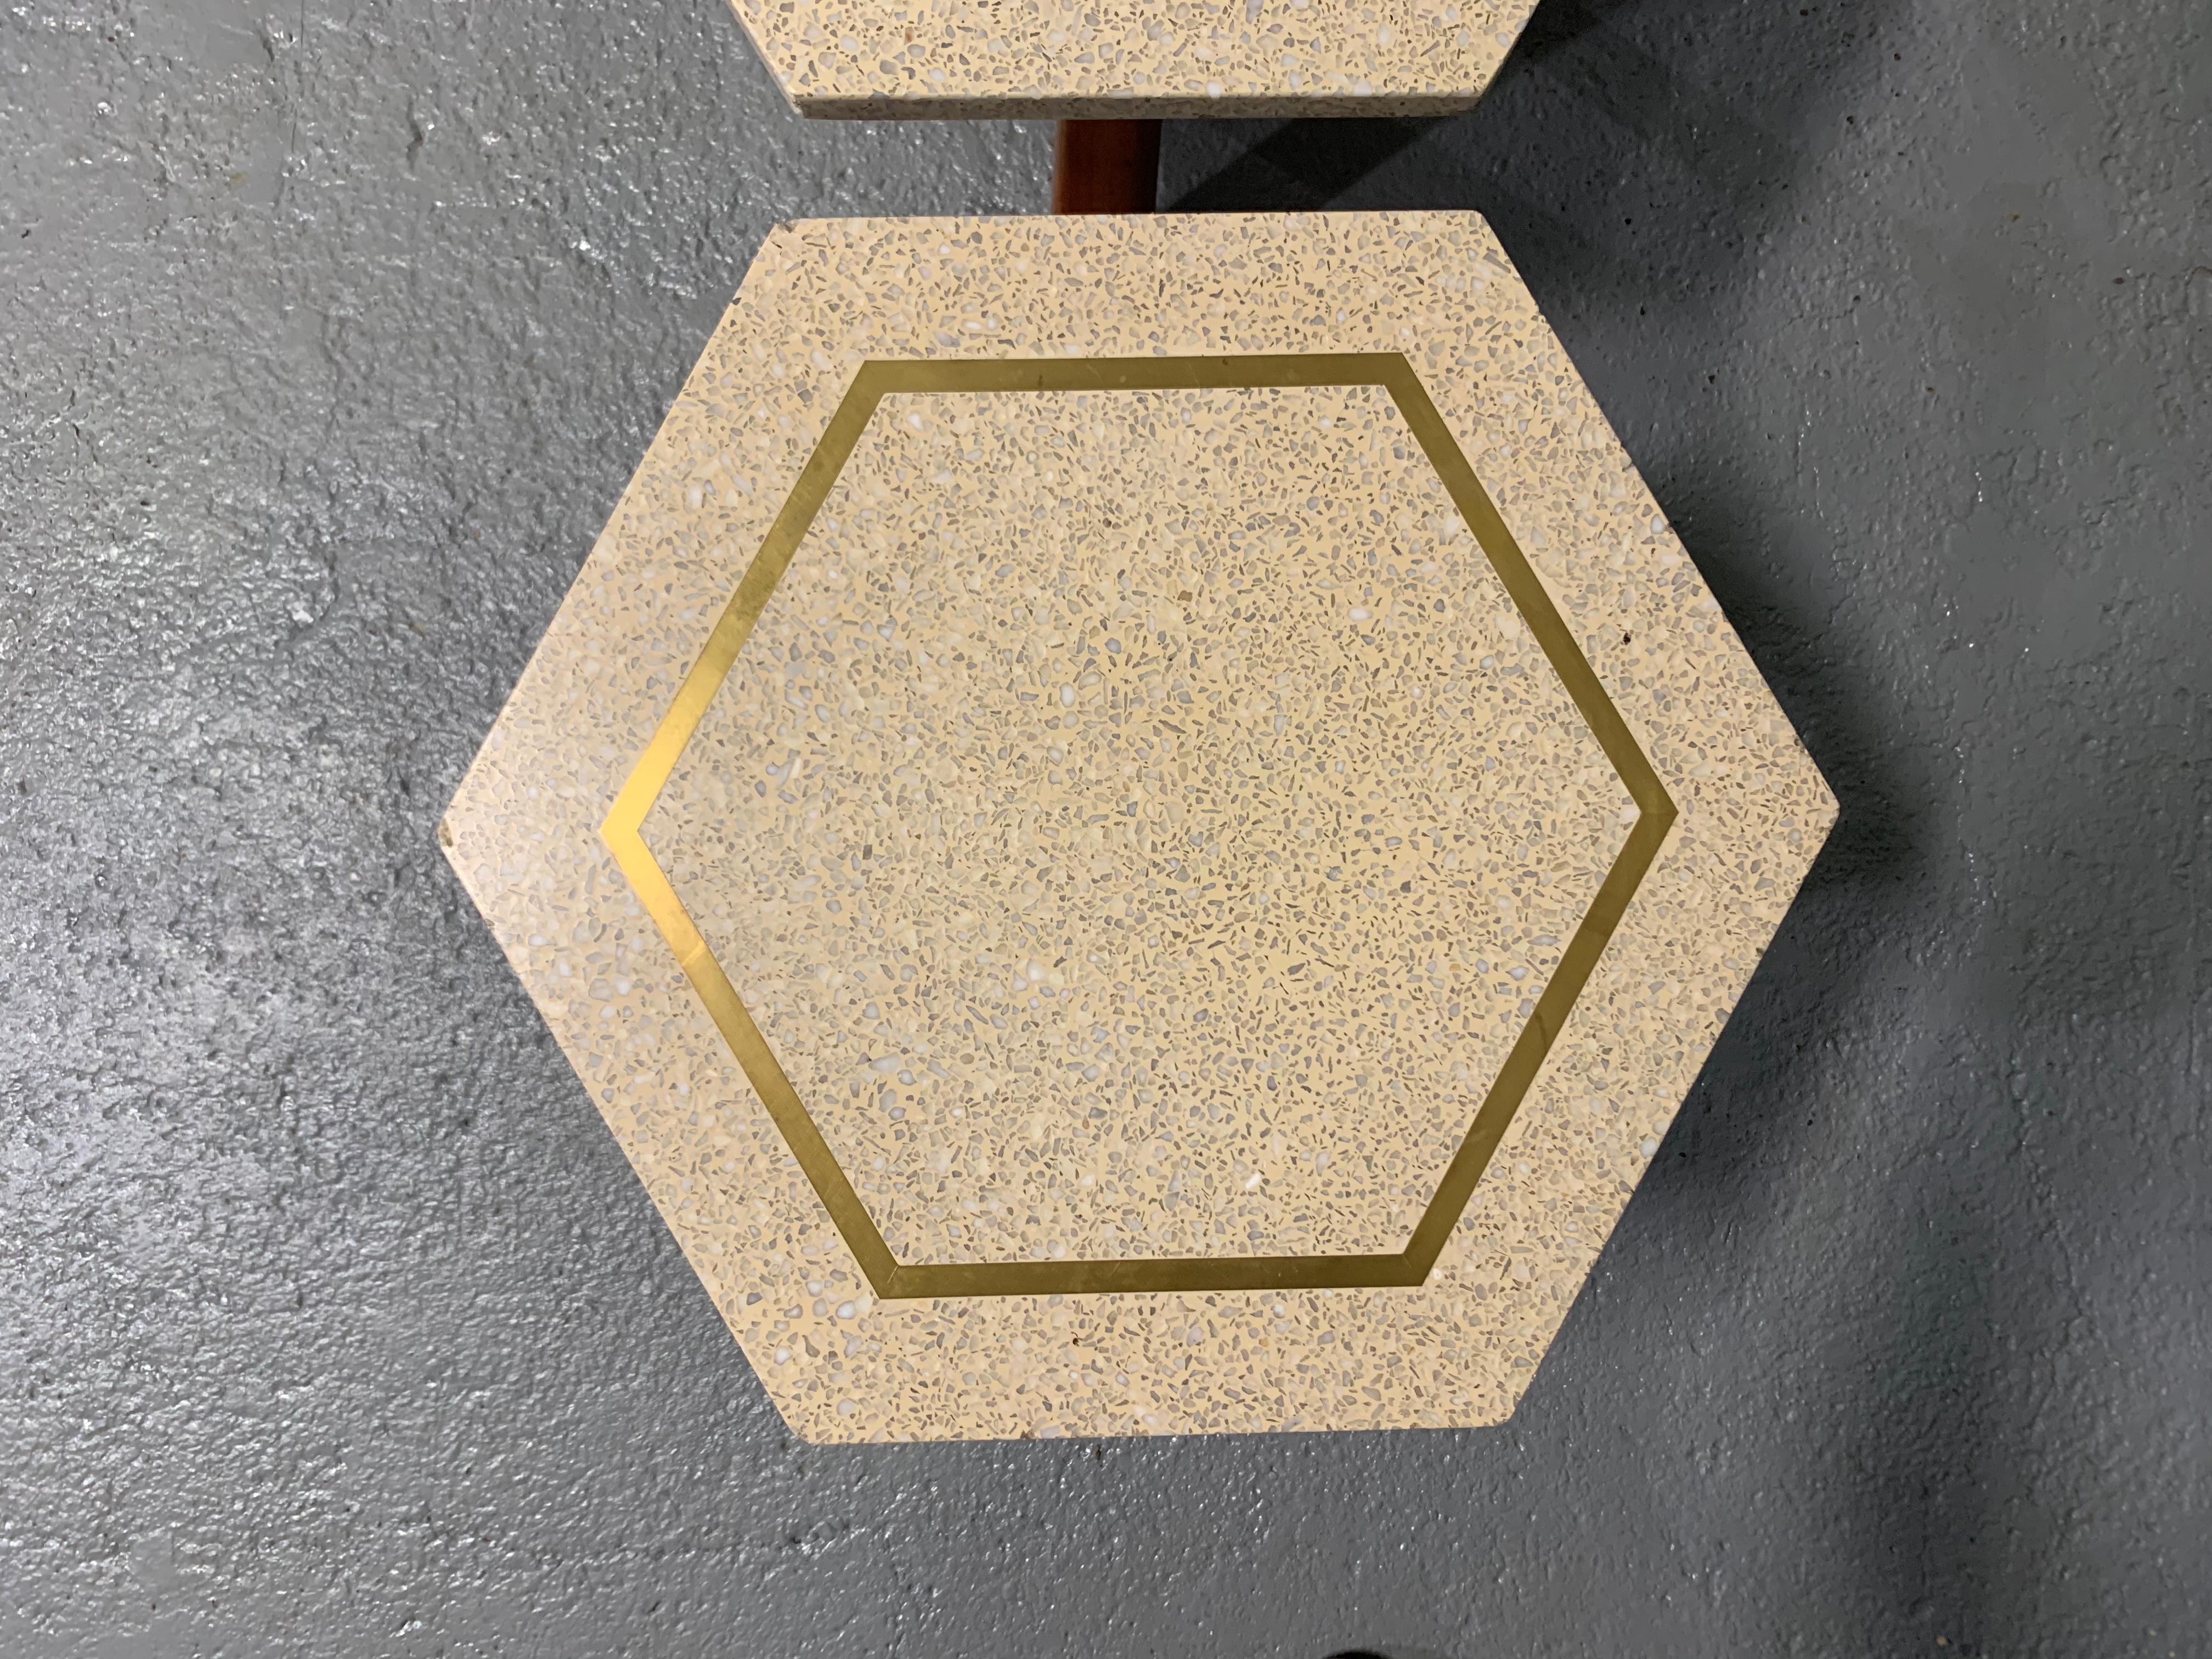 American Hexagonal Side Table Set by Harvey Probber with Terrazzo Stone Top, Brass Inlay